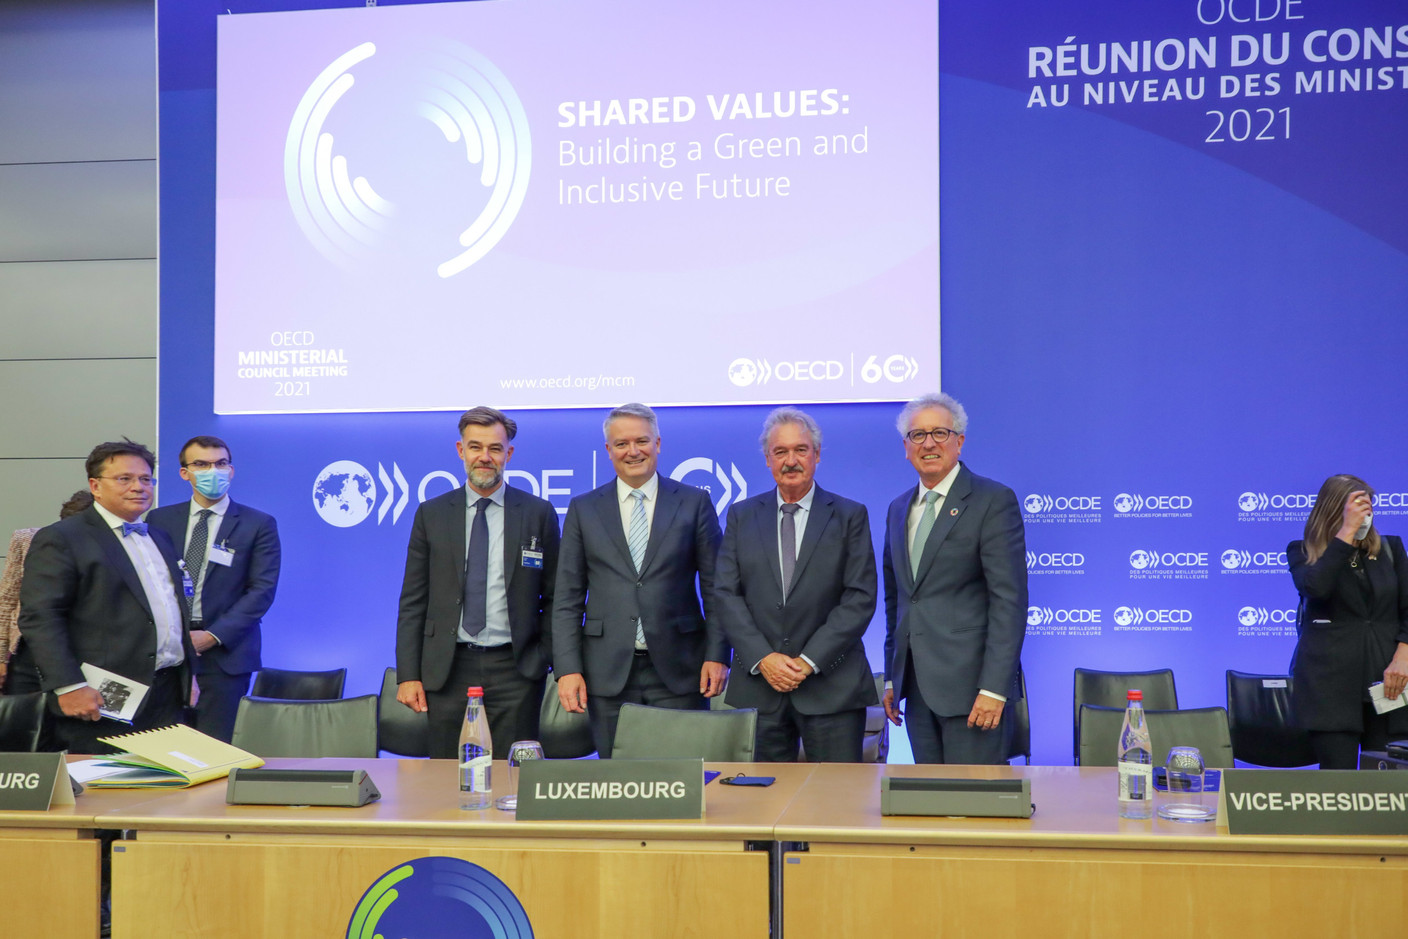 (l-r) n.c.; Franz Fayot, Minister for the Economy; Mathias Cormann, Secretary General of the Organisation for Economic Co-operation and Development (OECD); Jean Asselborn, Minister for Foreign and European Affairs; Pierre Gramegna, Minister for Finance SIP/LUC DEFLORENNE